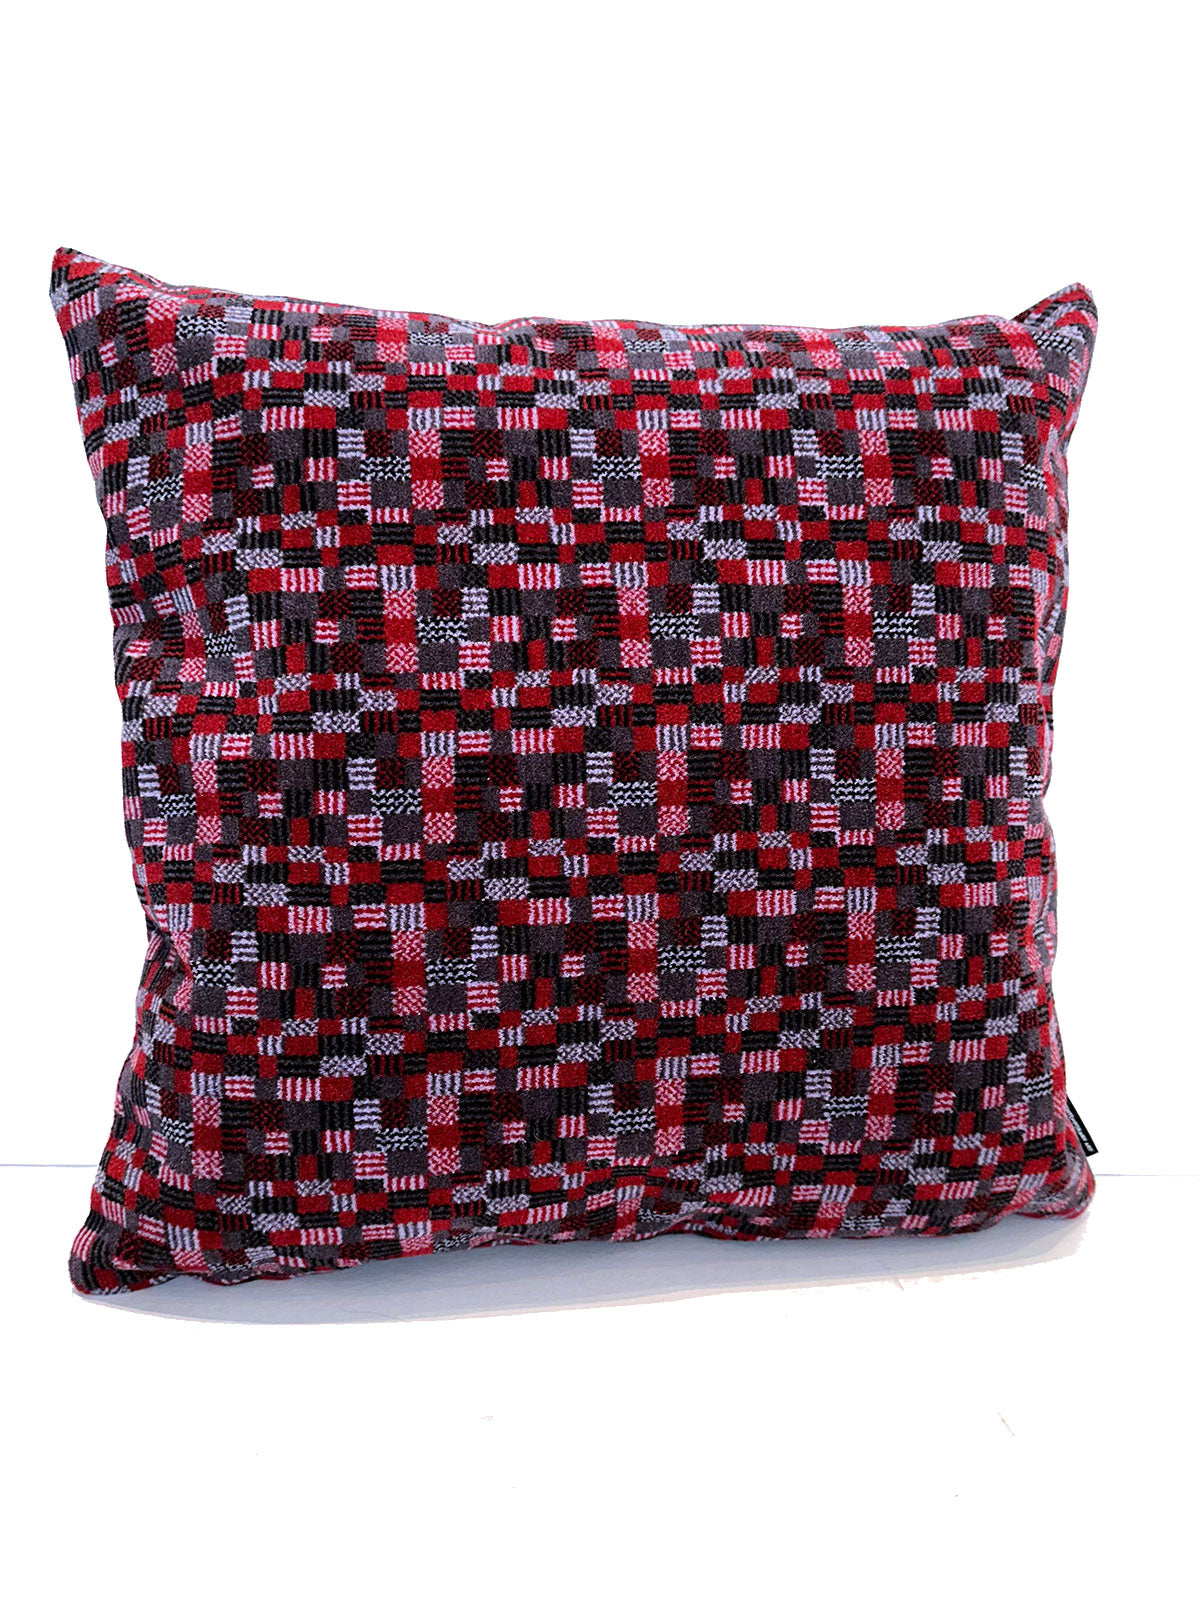 Moquette cushion - Grey and red squares